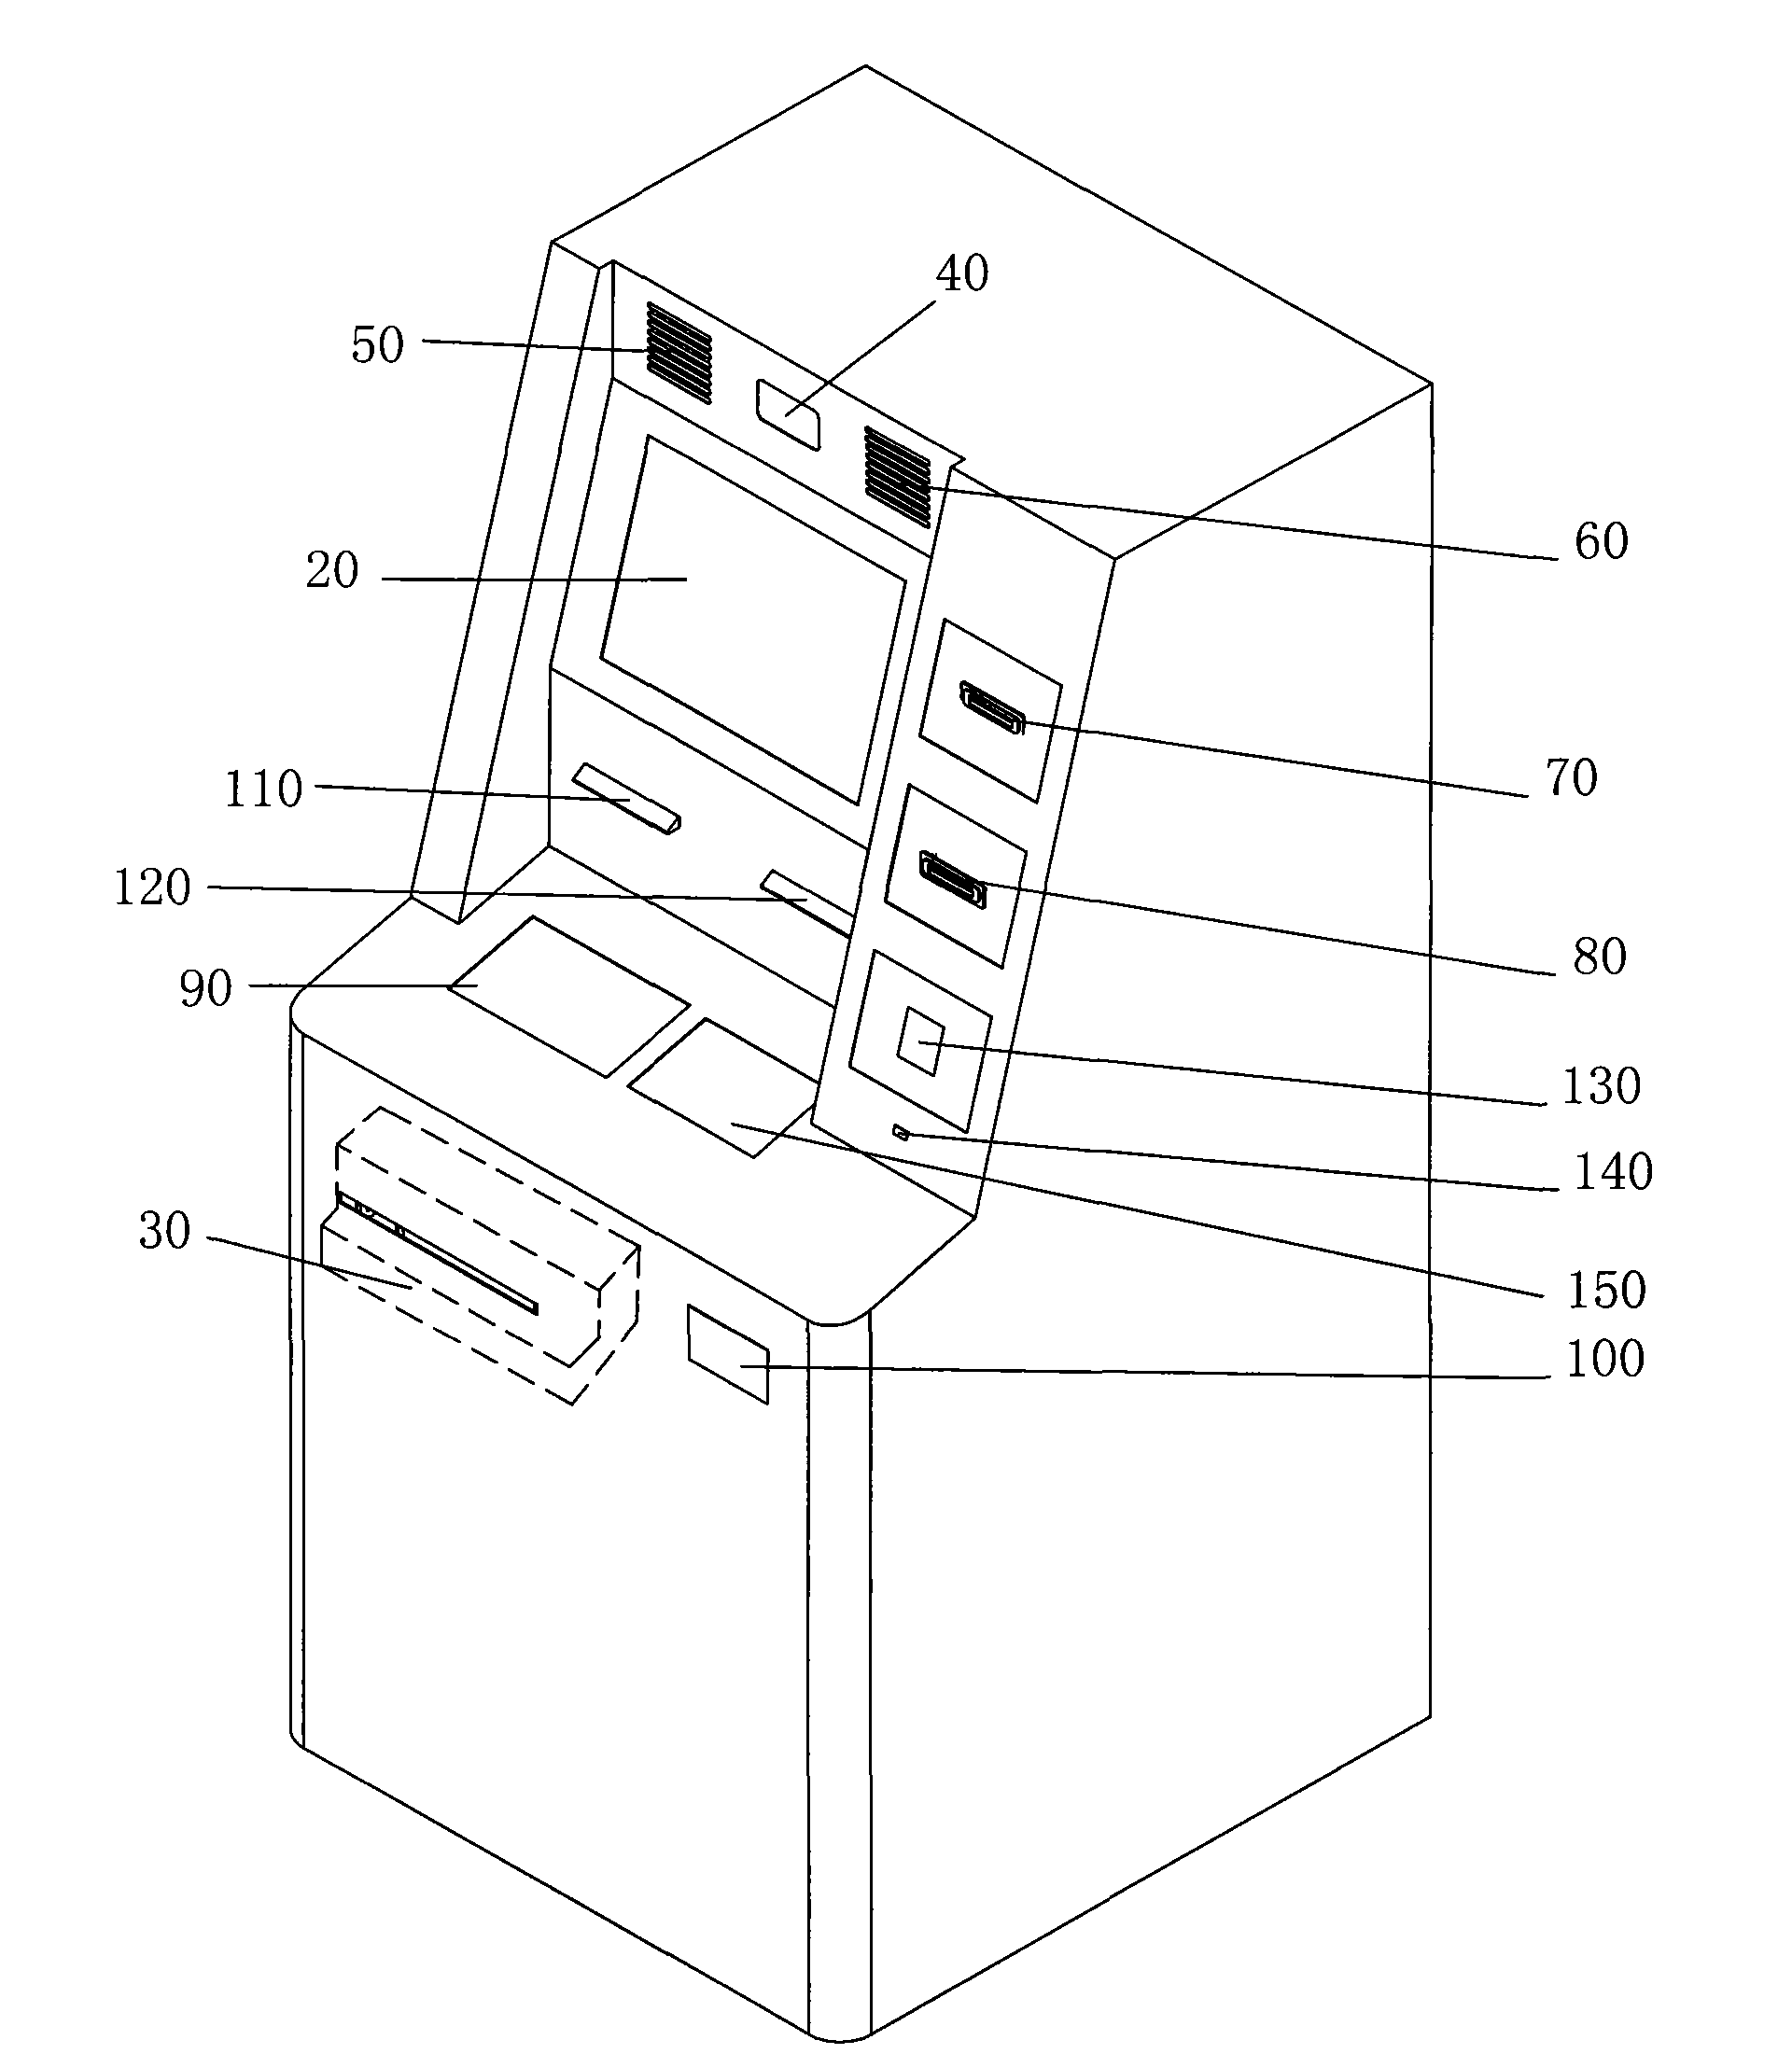 Self-help service system and self-help service method for bank